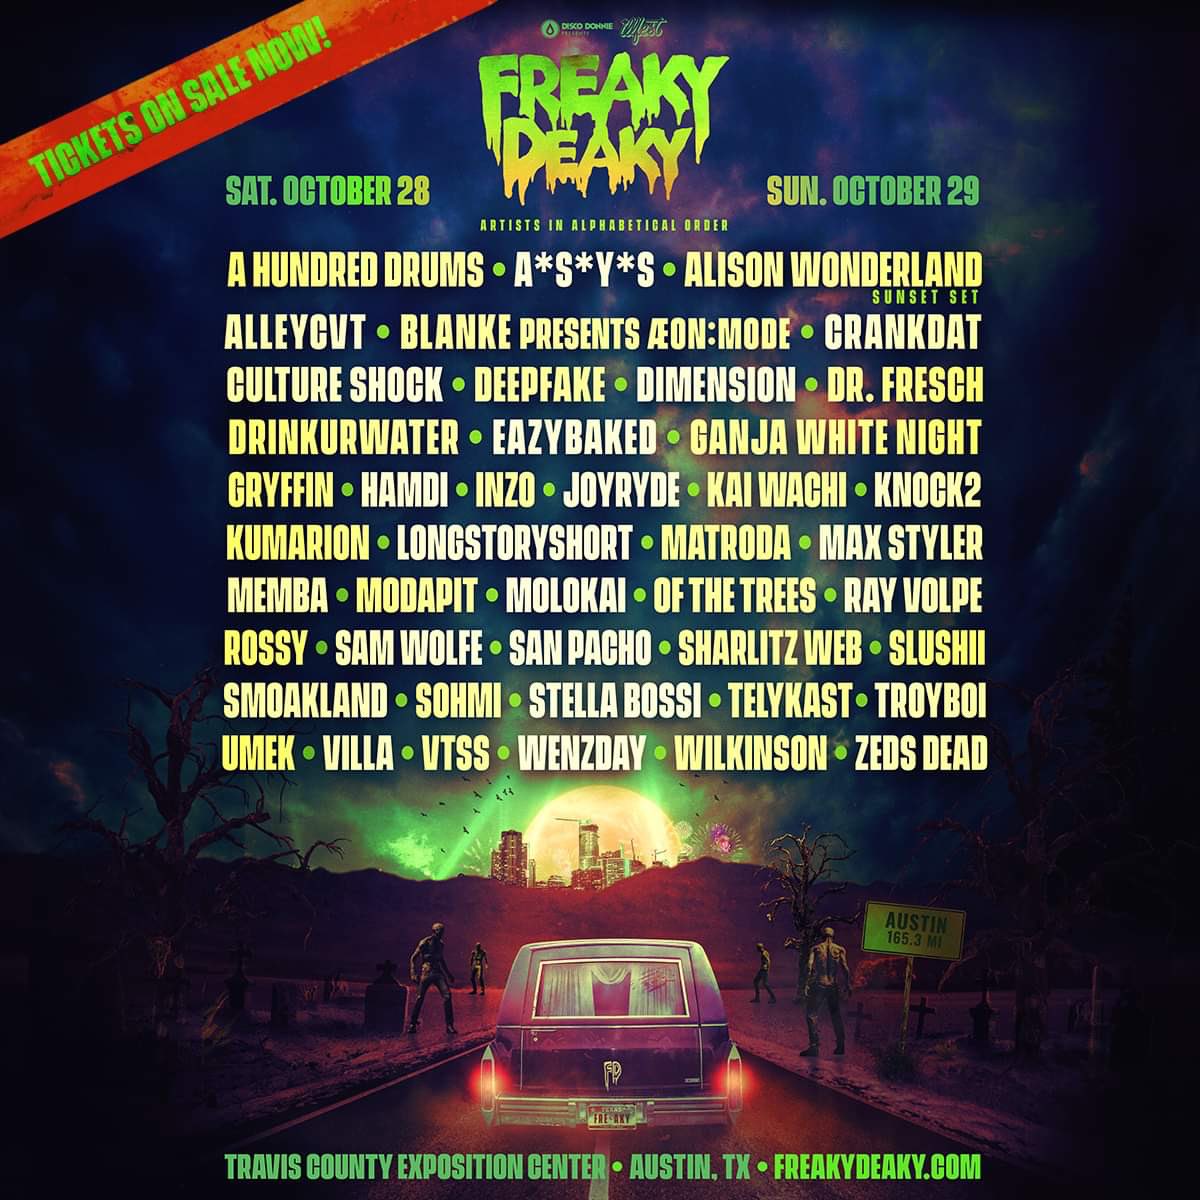 The @FreakyDeakyTX lineup has been announced. Tickets on sale now! I’ll see all you freaks this October ☠️ #FreakyDeakyTX Promo Code - TEXASEDM will be active 🎃 Tickets → bit.ly/freakytx